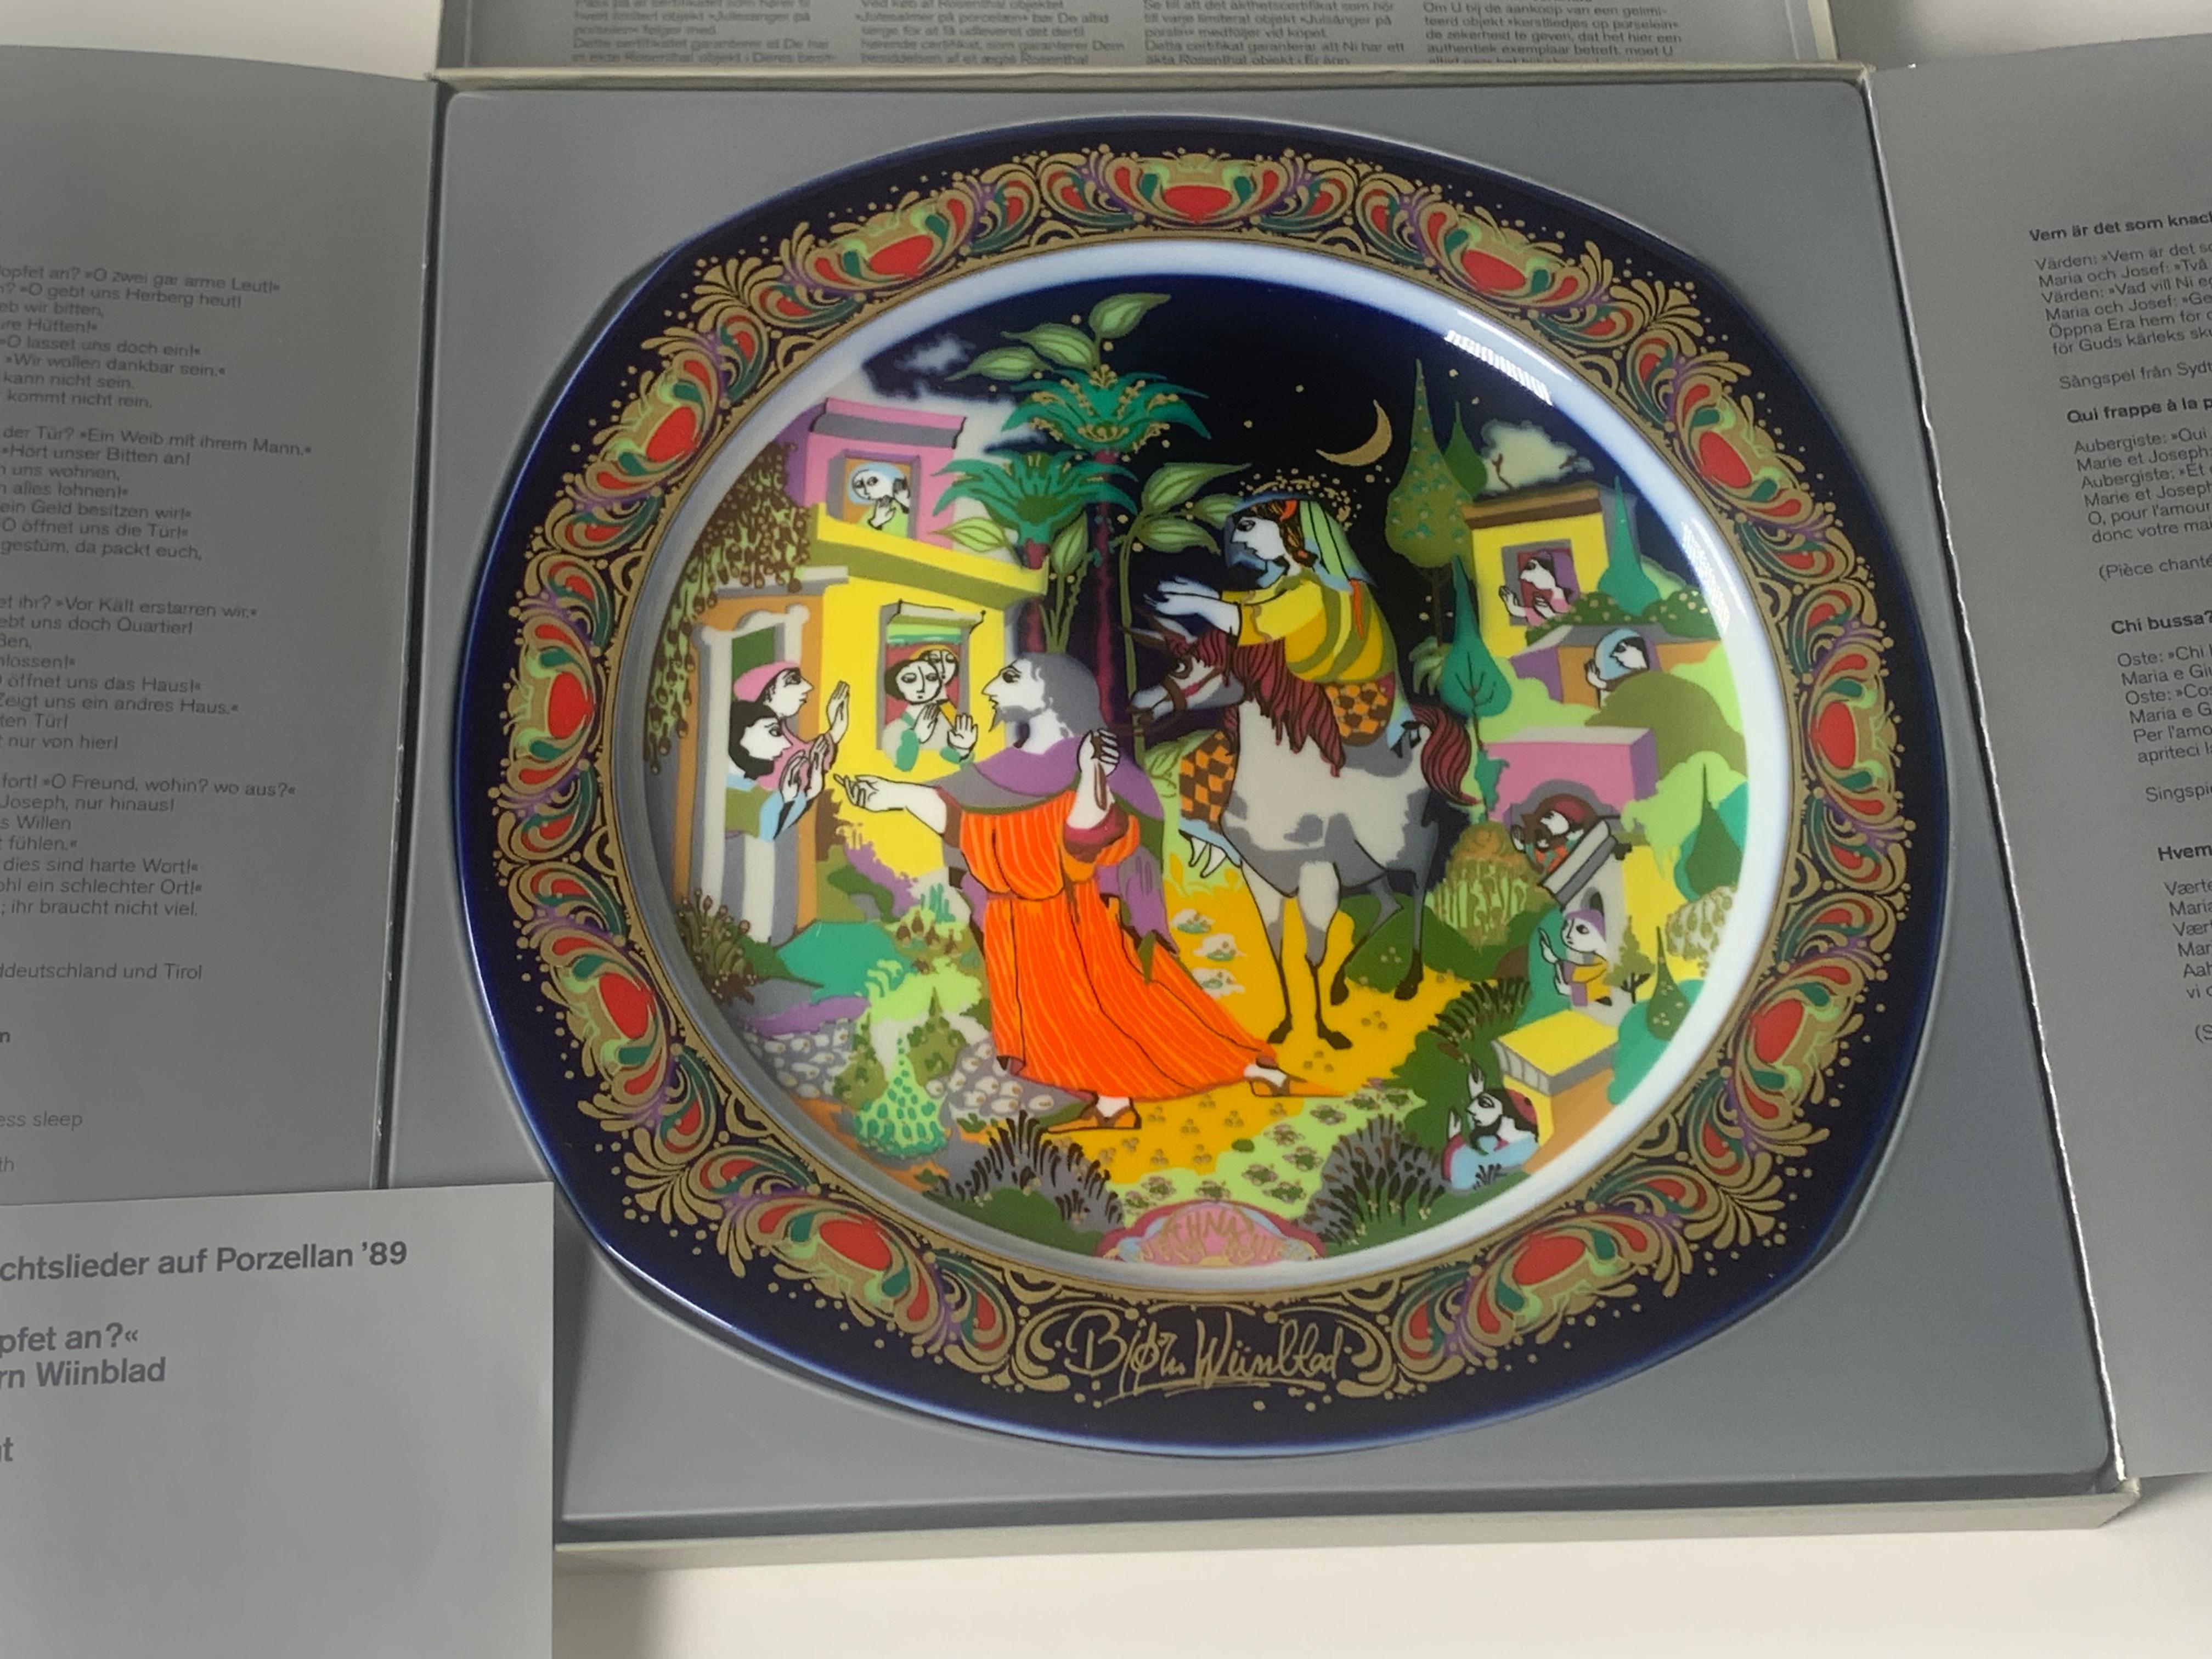 Porcelain Christmas plate from 1989 by Bjorn Wiinblad made by the German manufacturer Rosenthal. The dish is titled “O Little Town of Bethlehem” and is reason no. 7 of the series. When Rosenthal asked the Danish artist to illustrate a new series of